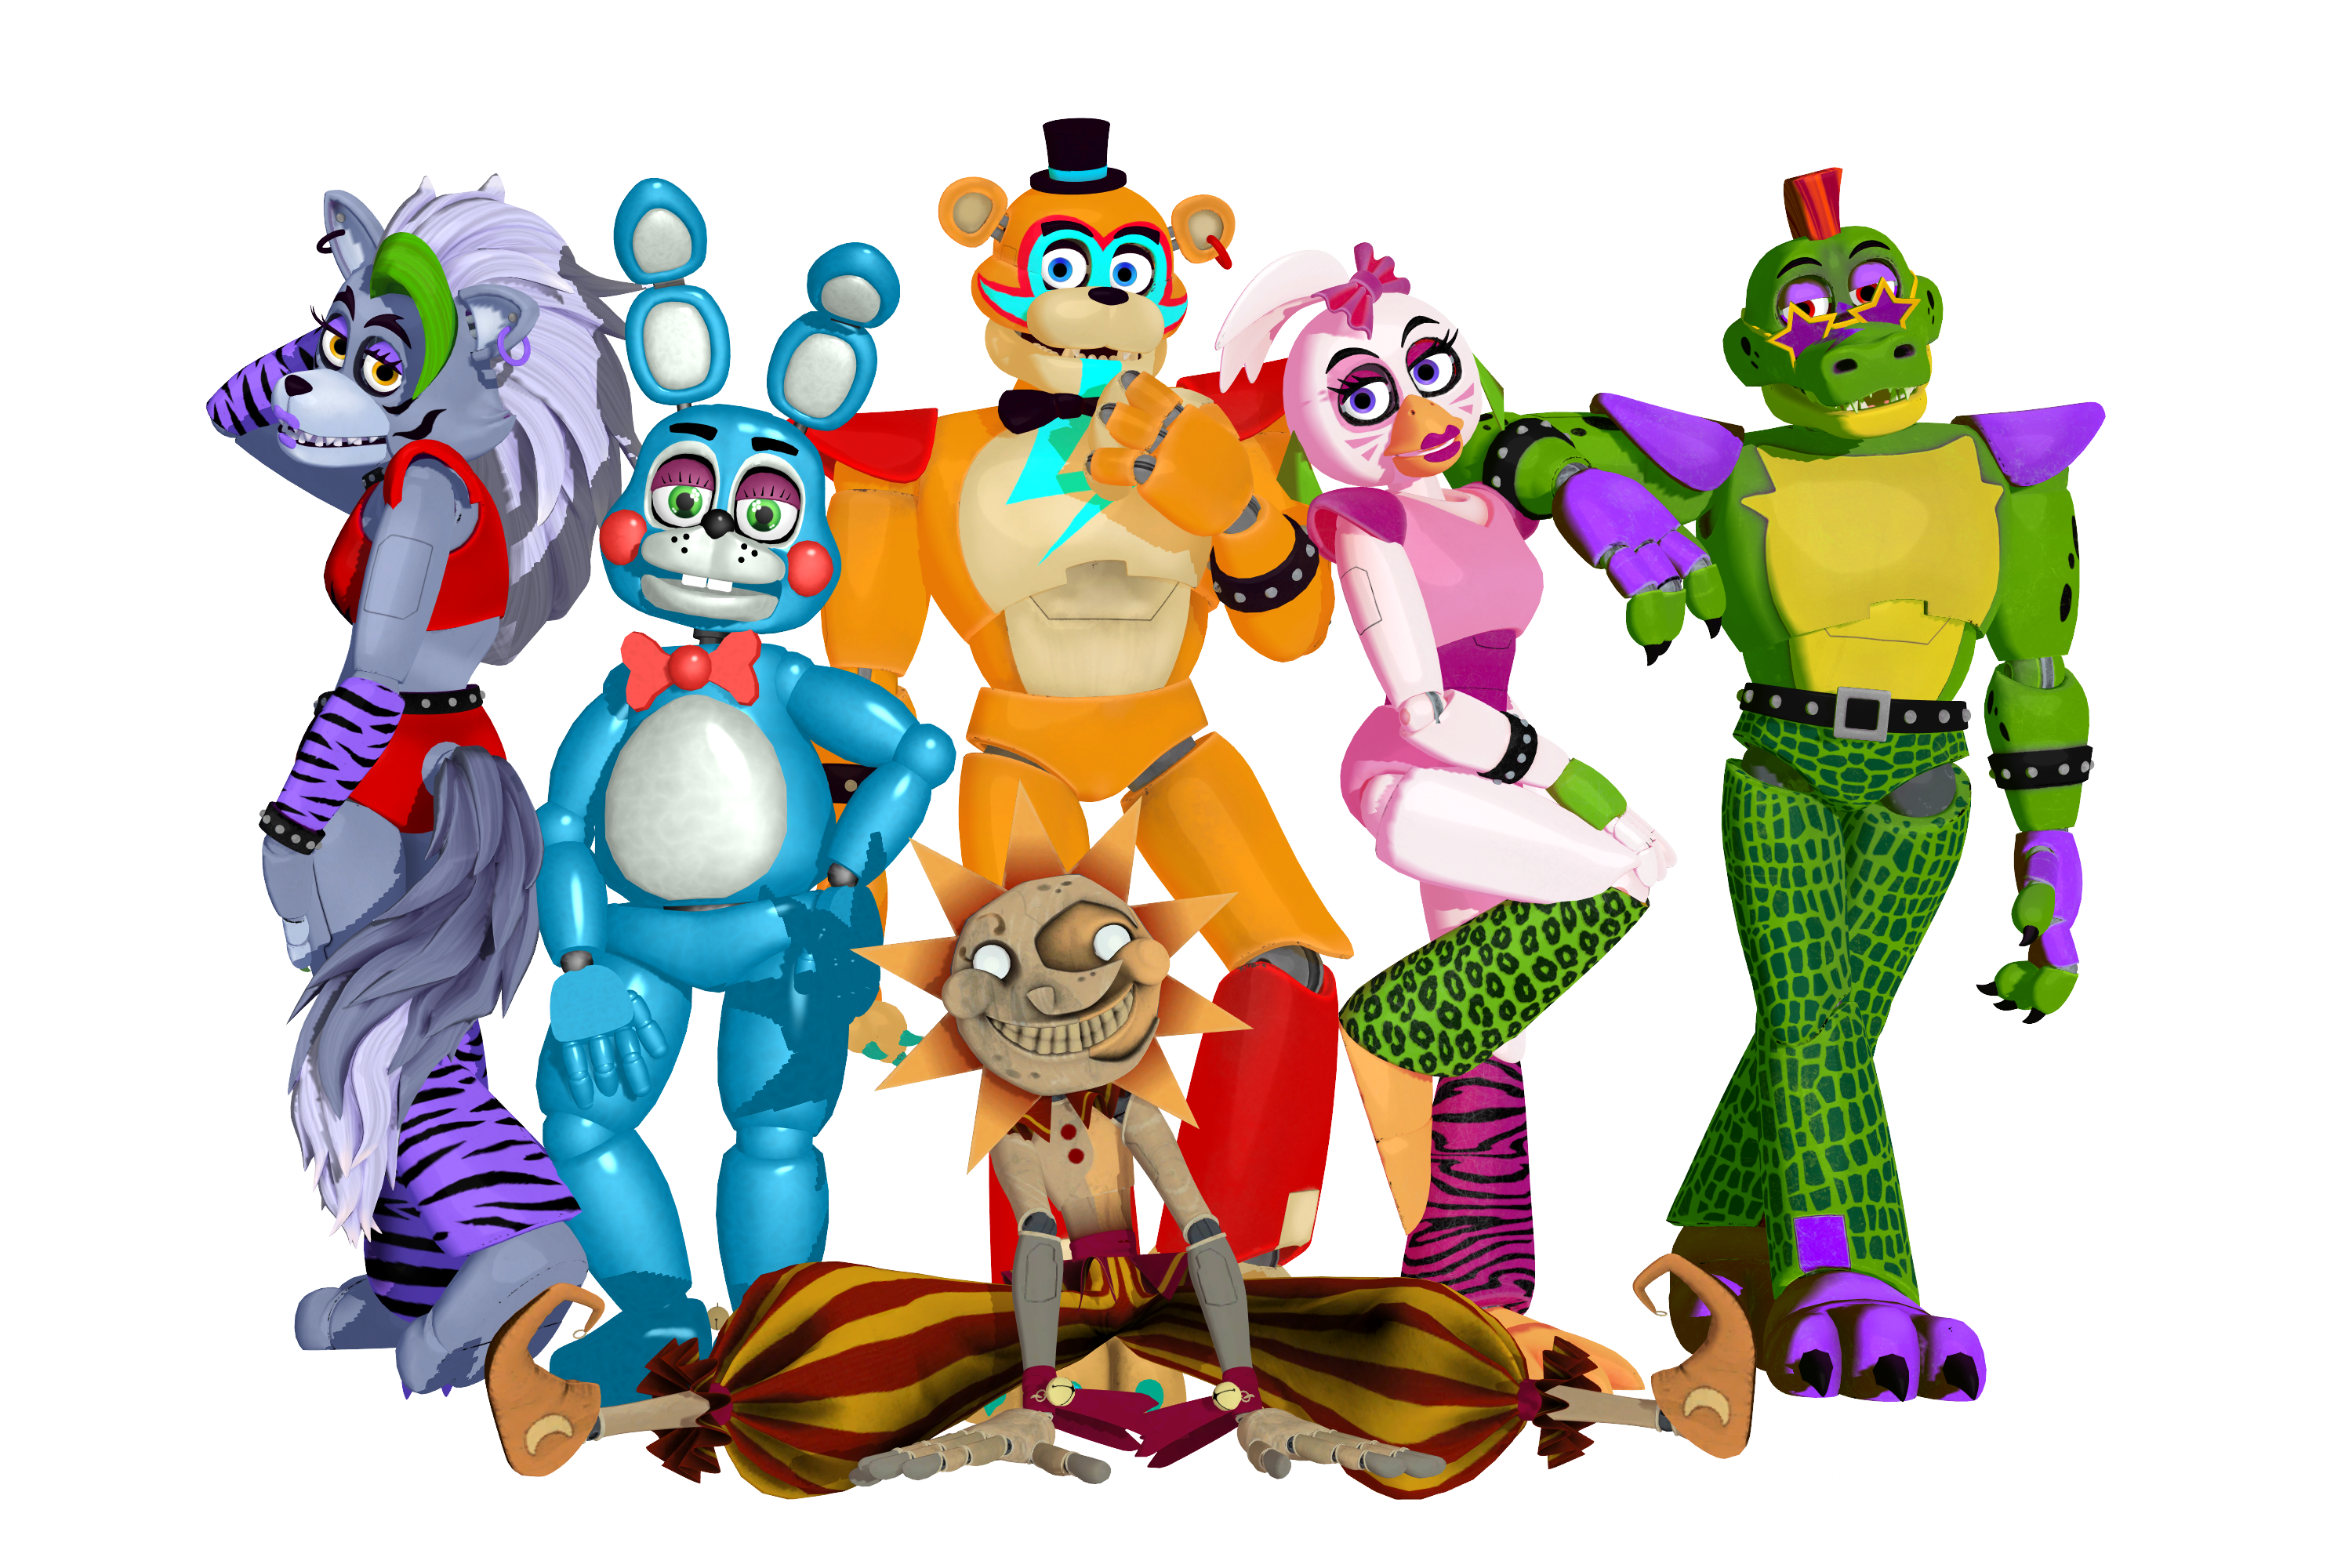 Download All your favourite FNaF characters in one image!